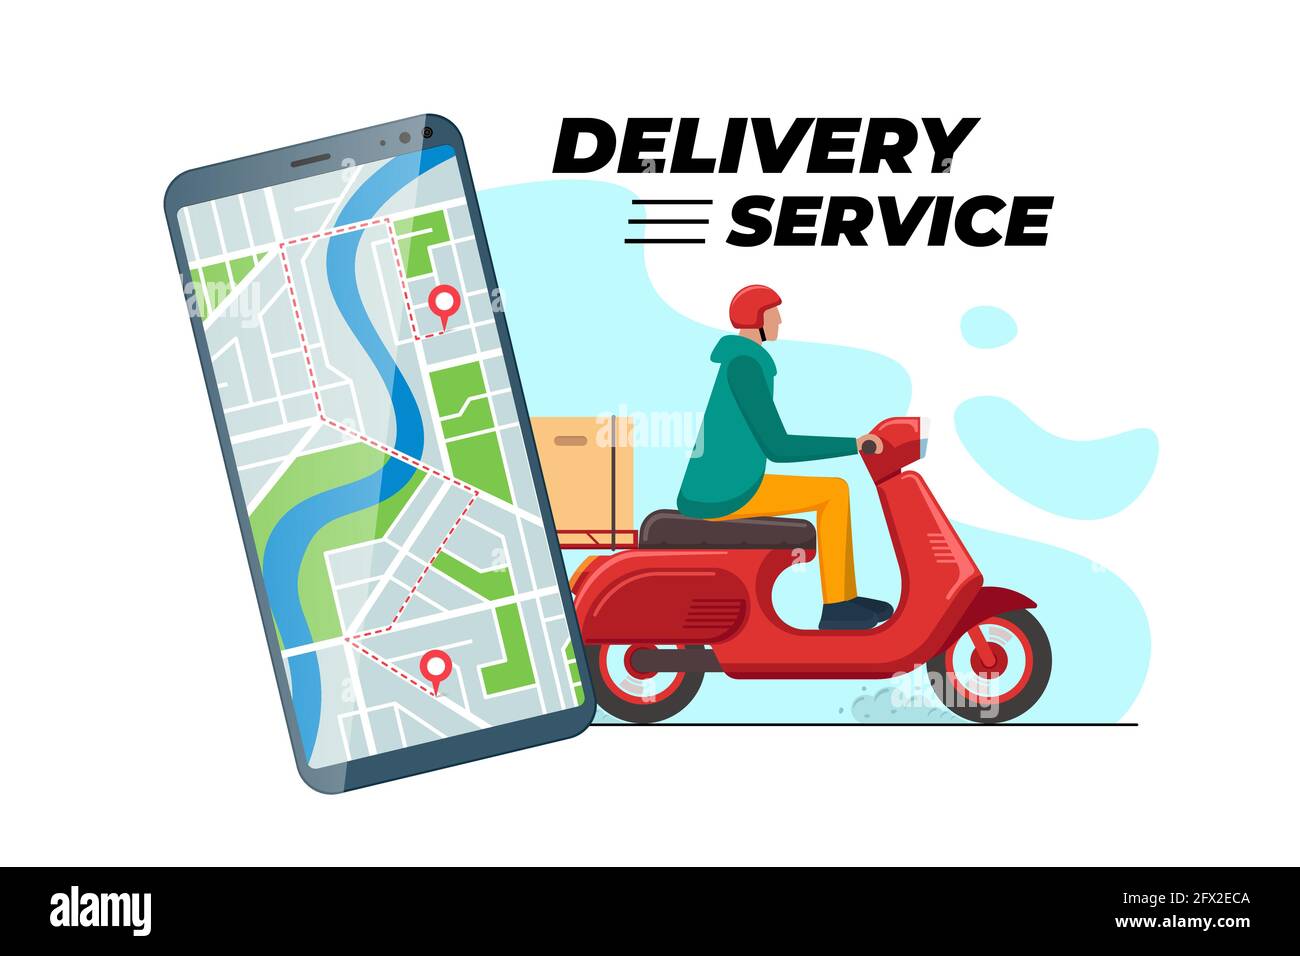 Safe contactless delivery tracking service app concept banner. Boy courier in motorbike helmet on red scooter moped delivering package box. Online ordering mobile city map application and location eps Stock Vector